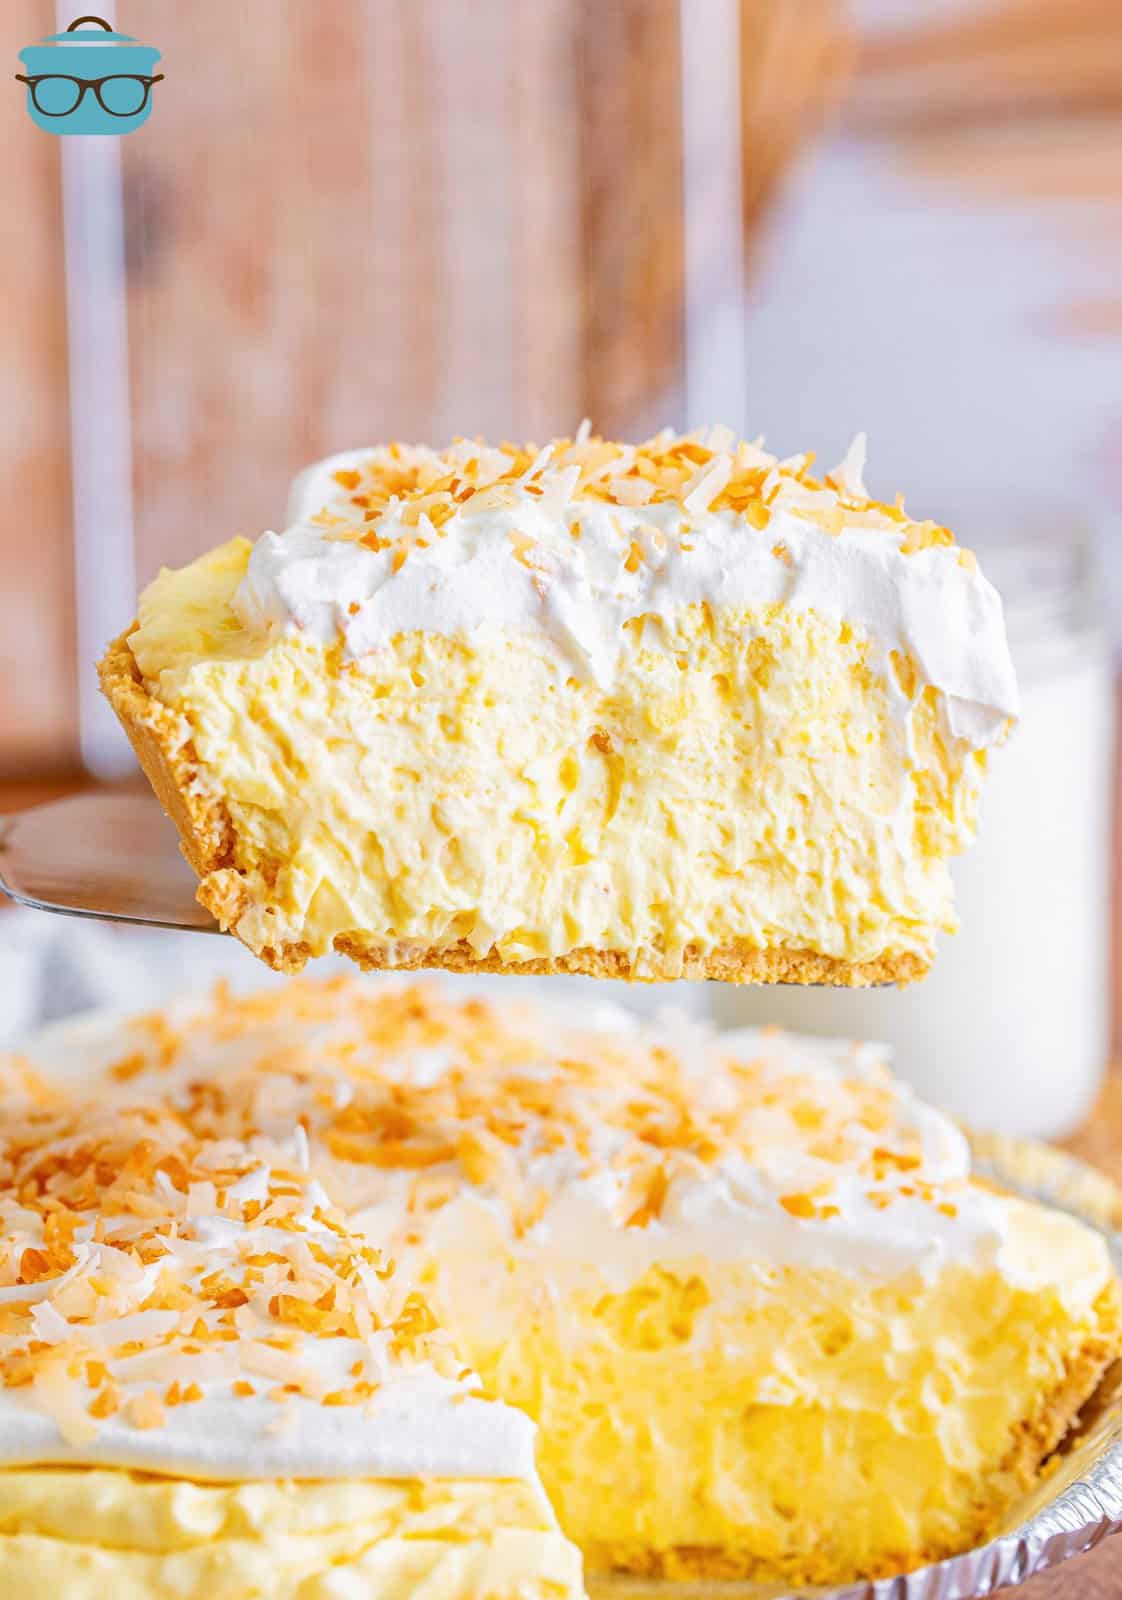 A slice of No Bake Coconut Cream Pie above the rest of the pie.